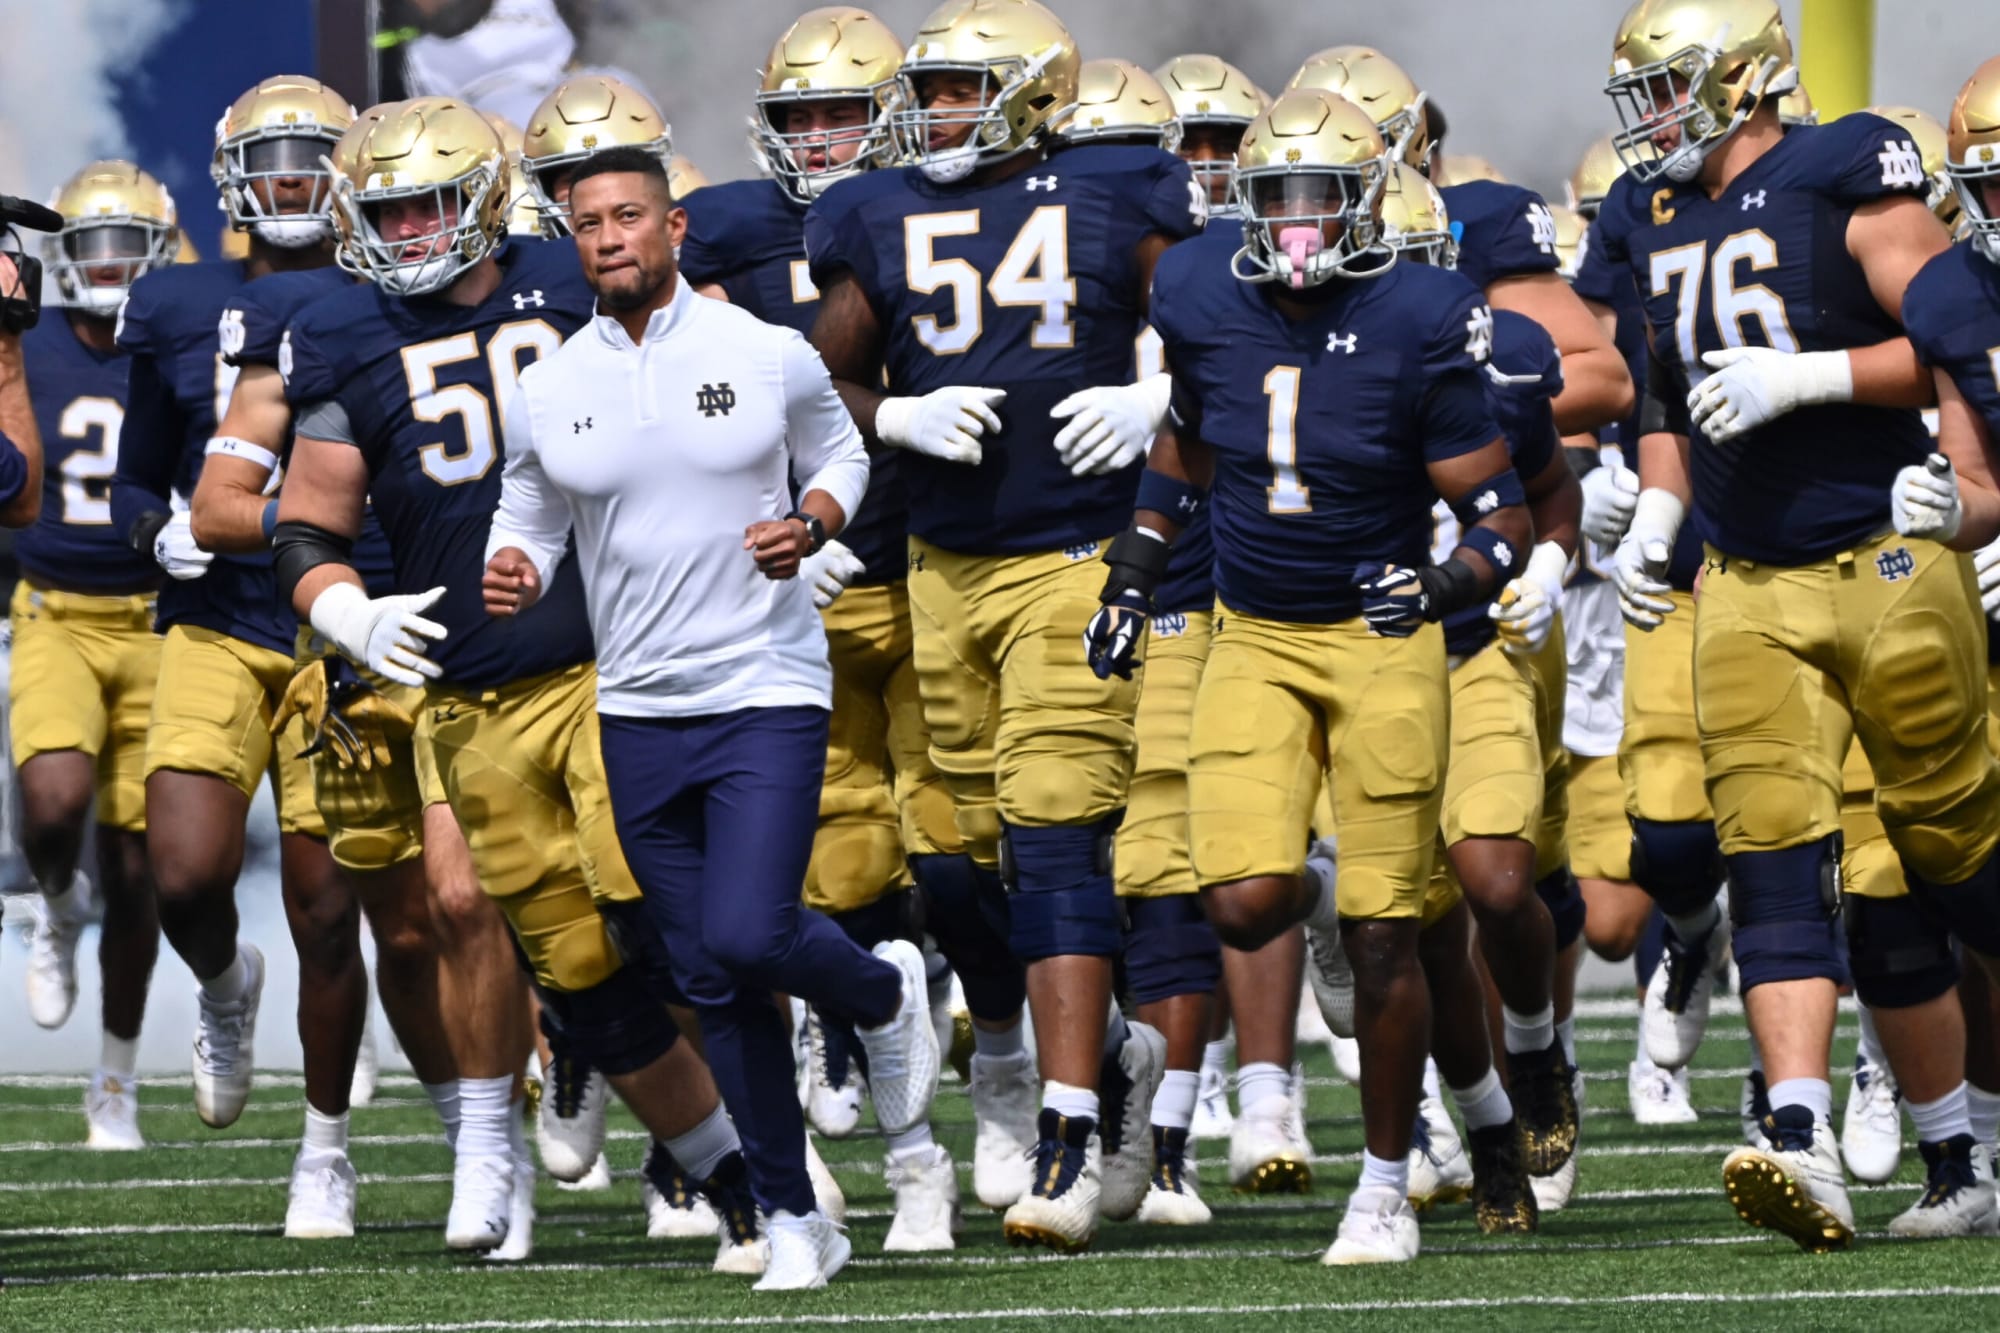 Three way-too-early Riley Leonard bold predictions after transferring to  Notre Dame football